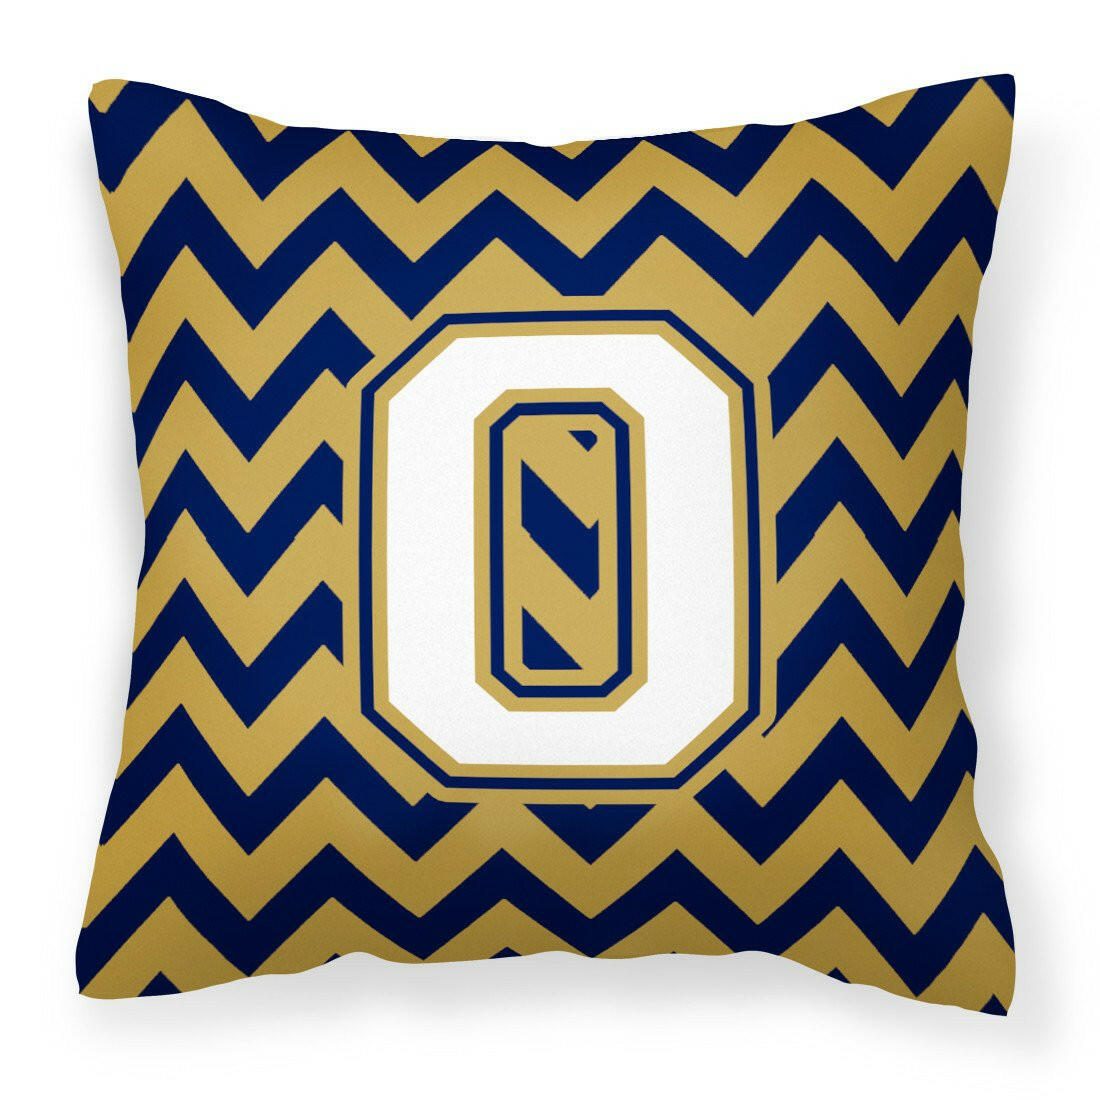 Letter O Chevron Navy Blue and Gold Fabric Decorative Pillow CJ1057-OPW1414 by Caroline's Treasures